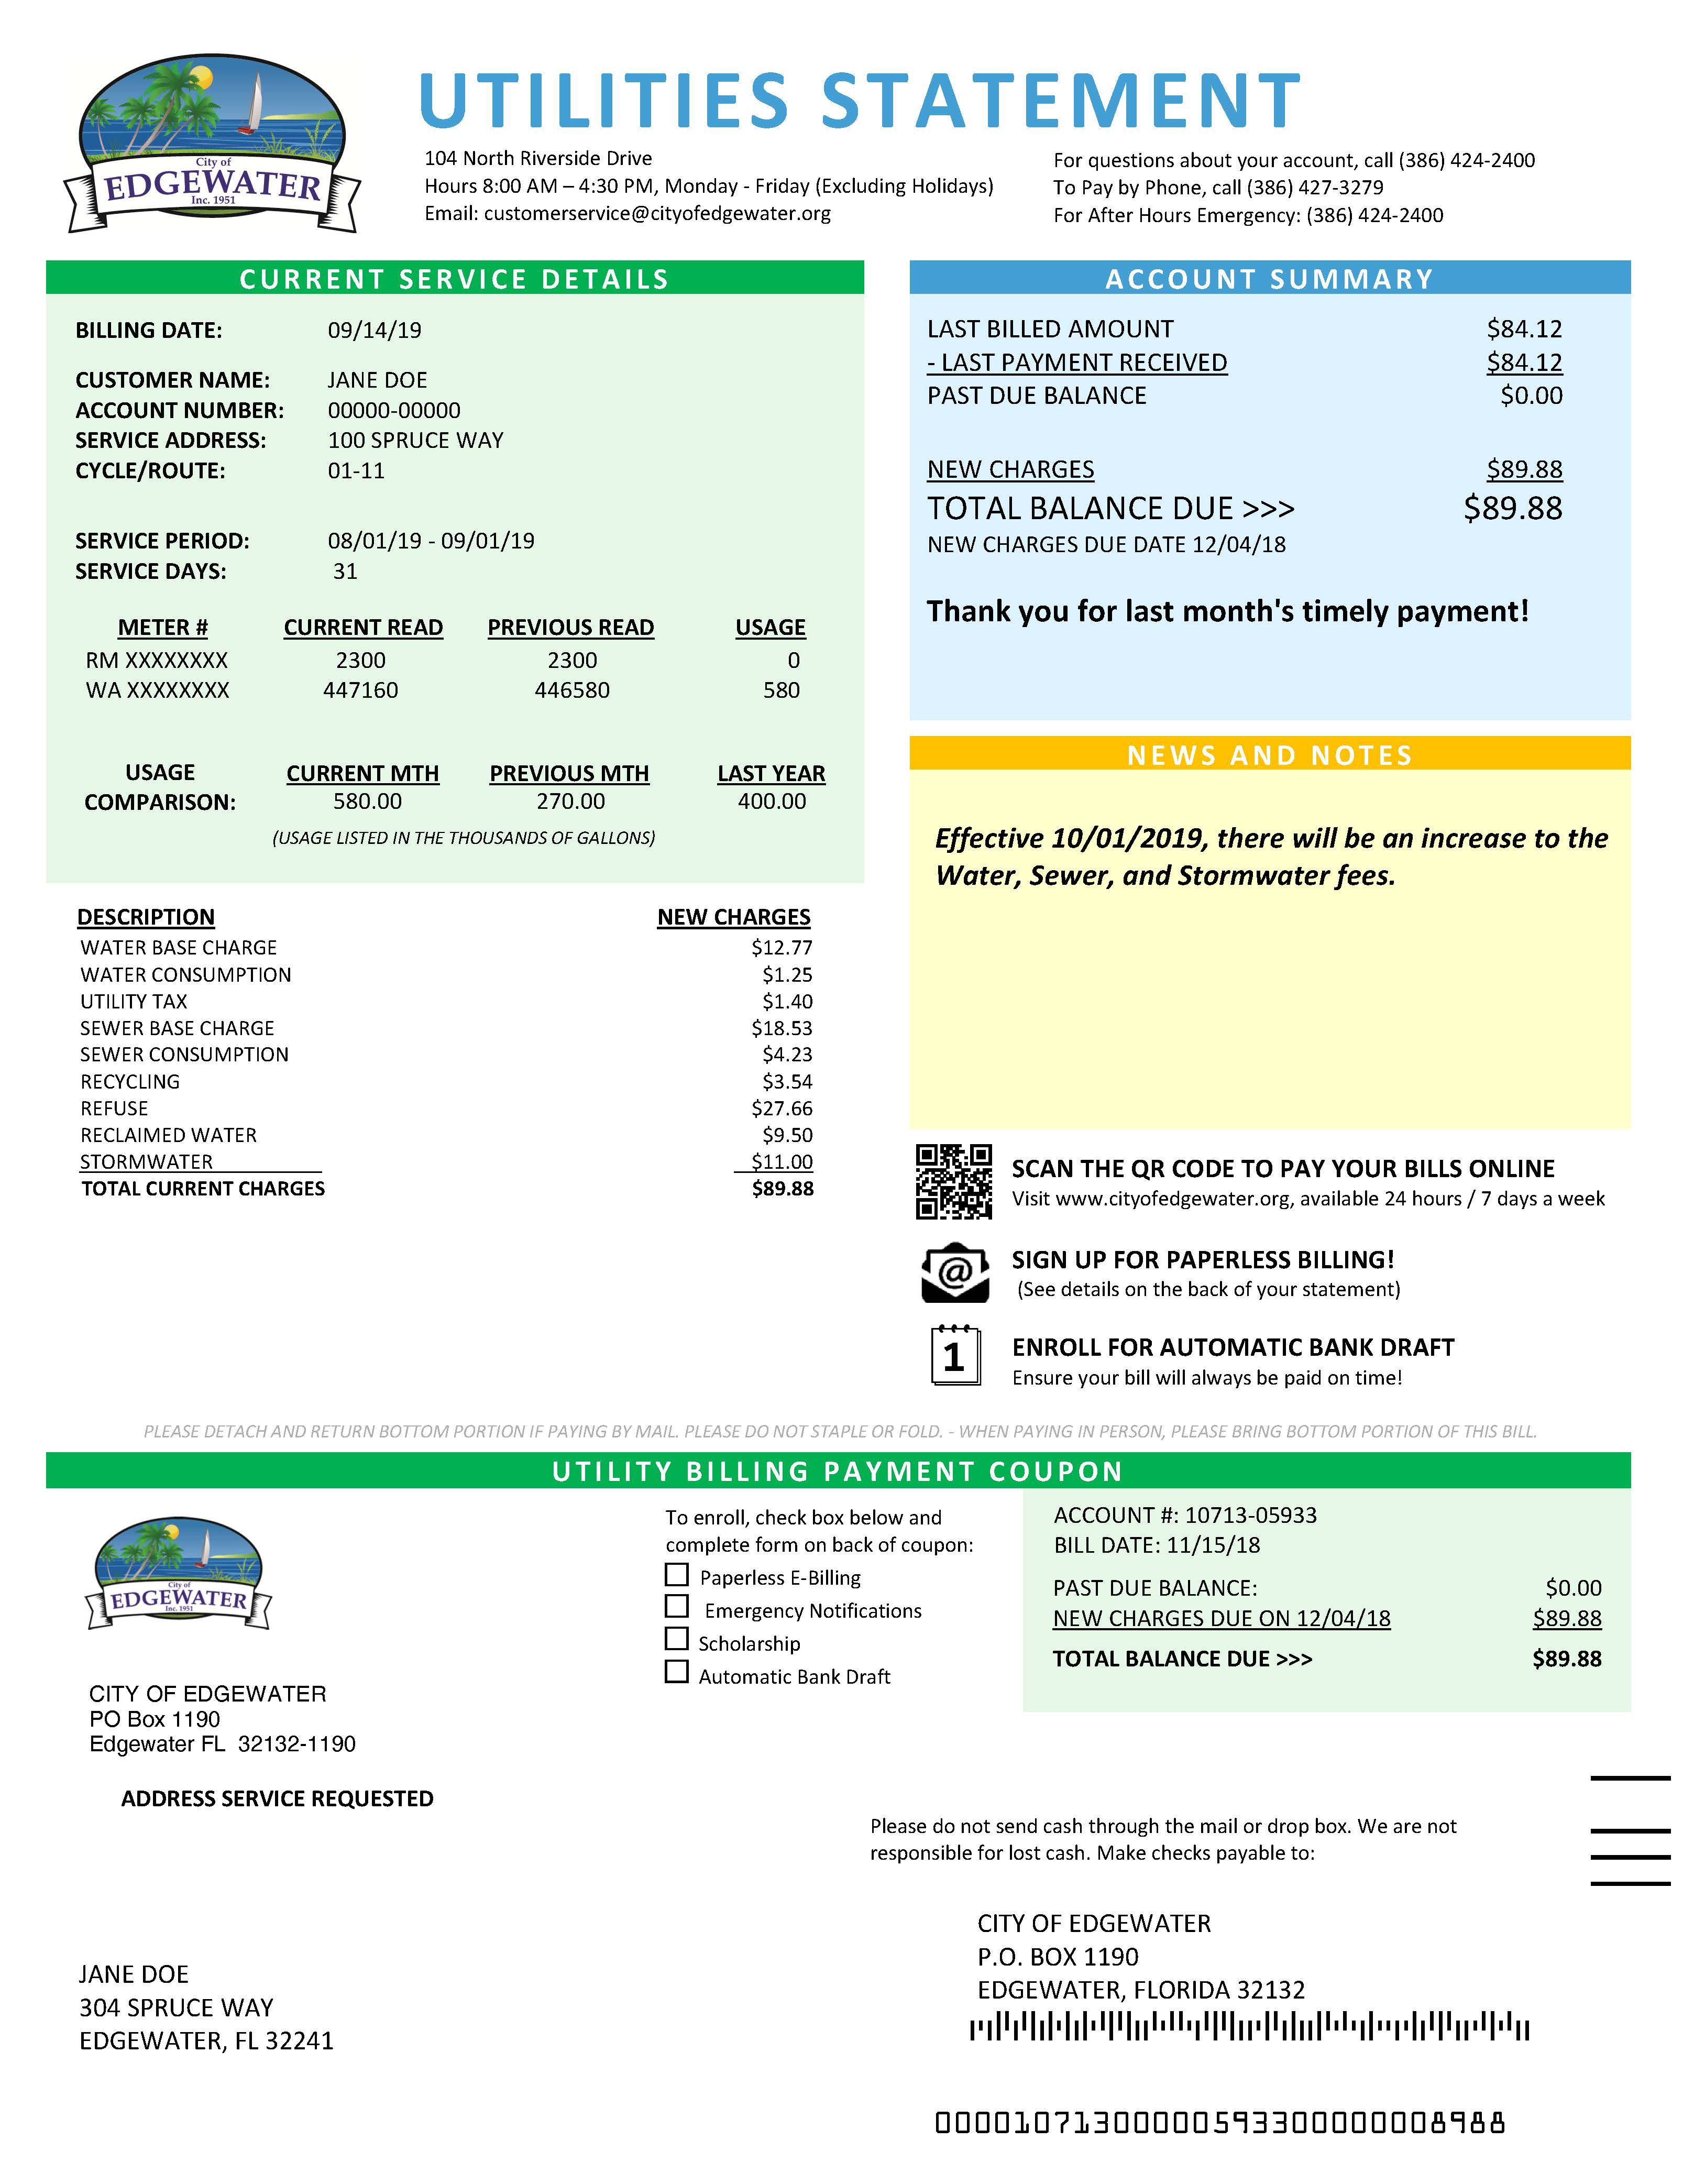 City of Edgewater Monthly Utility Bill | City of Edgewater Florida